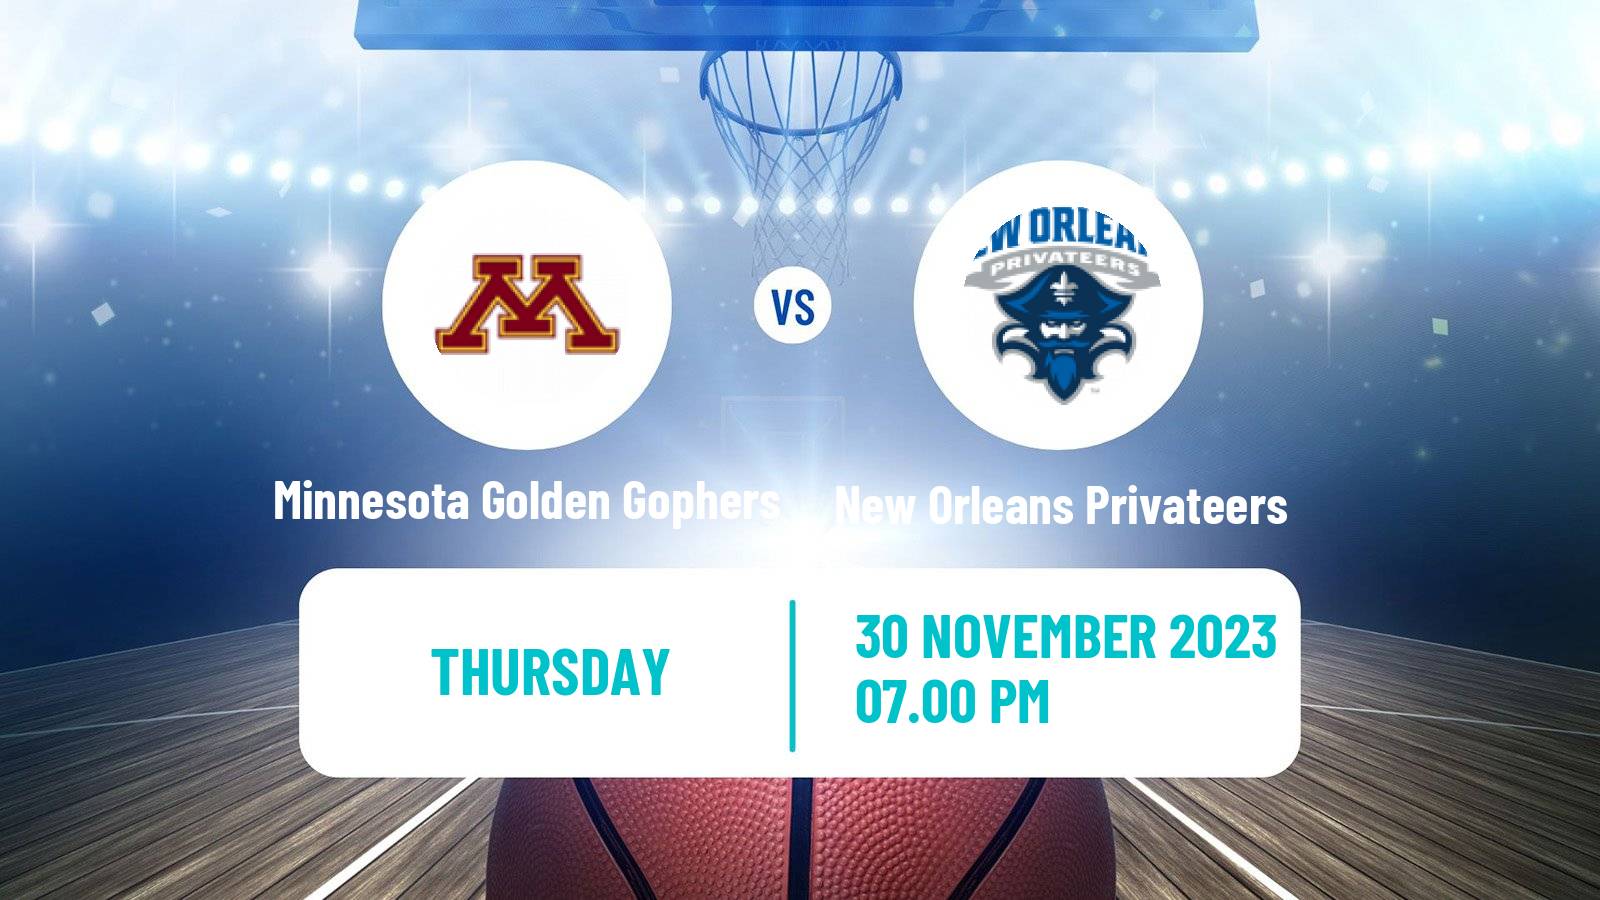 Basketball NCAA College Basketball Minnesota Golden Gophers - New Orleans Privateers